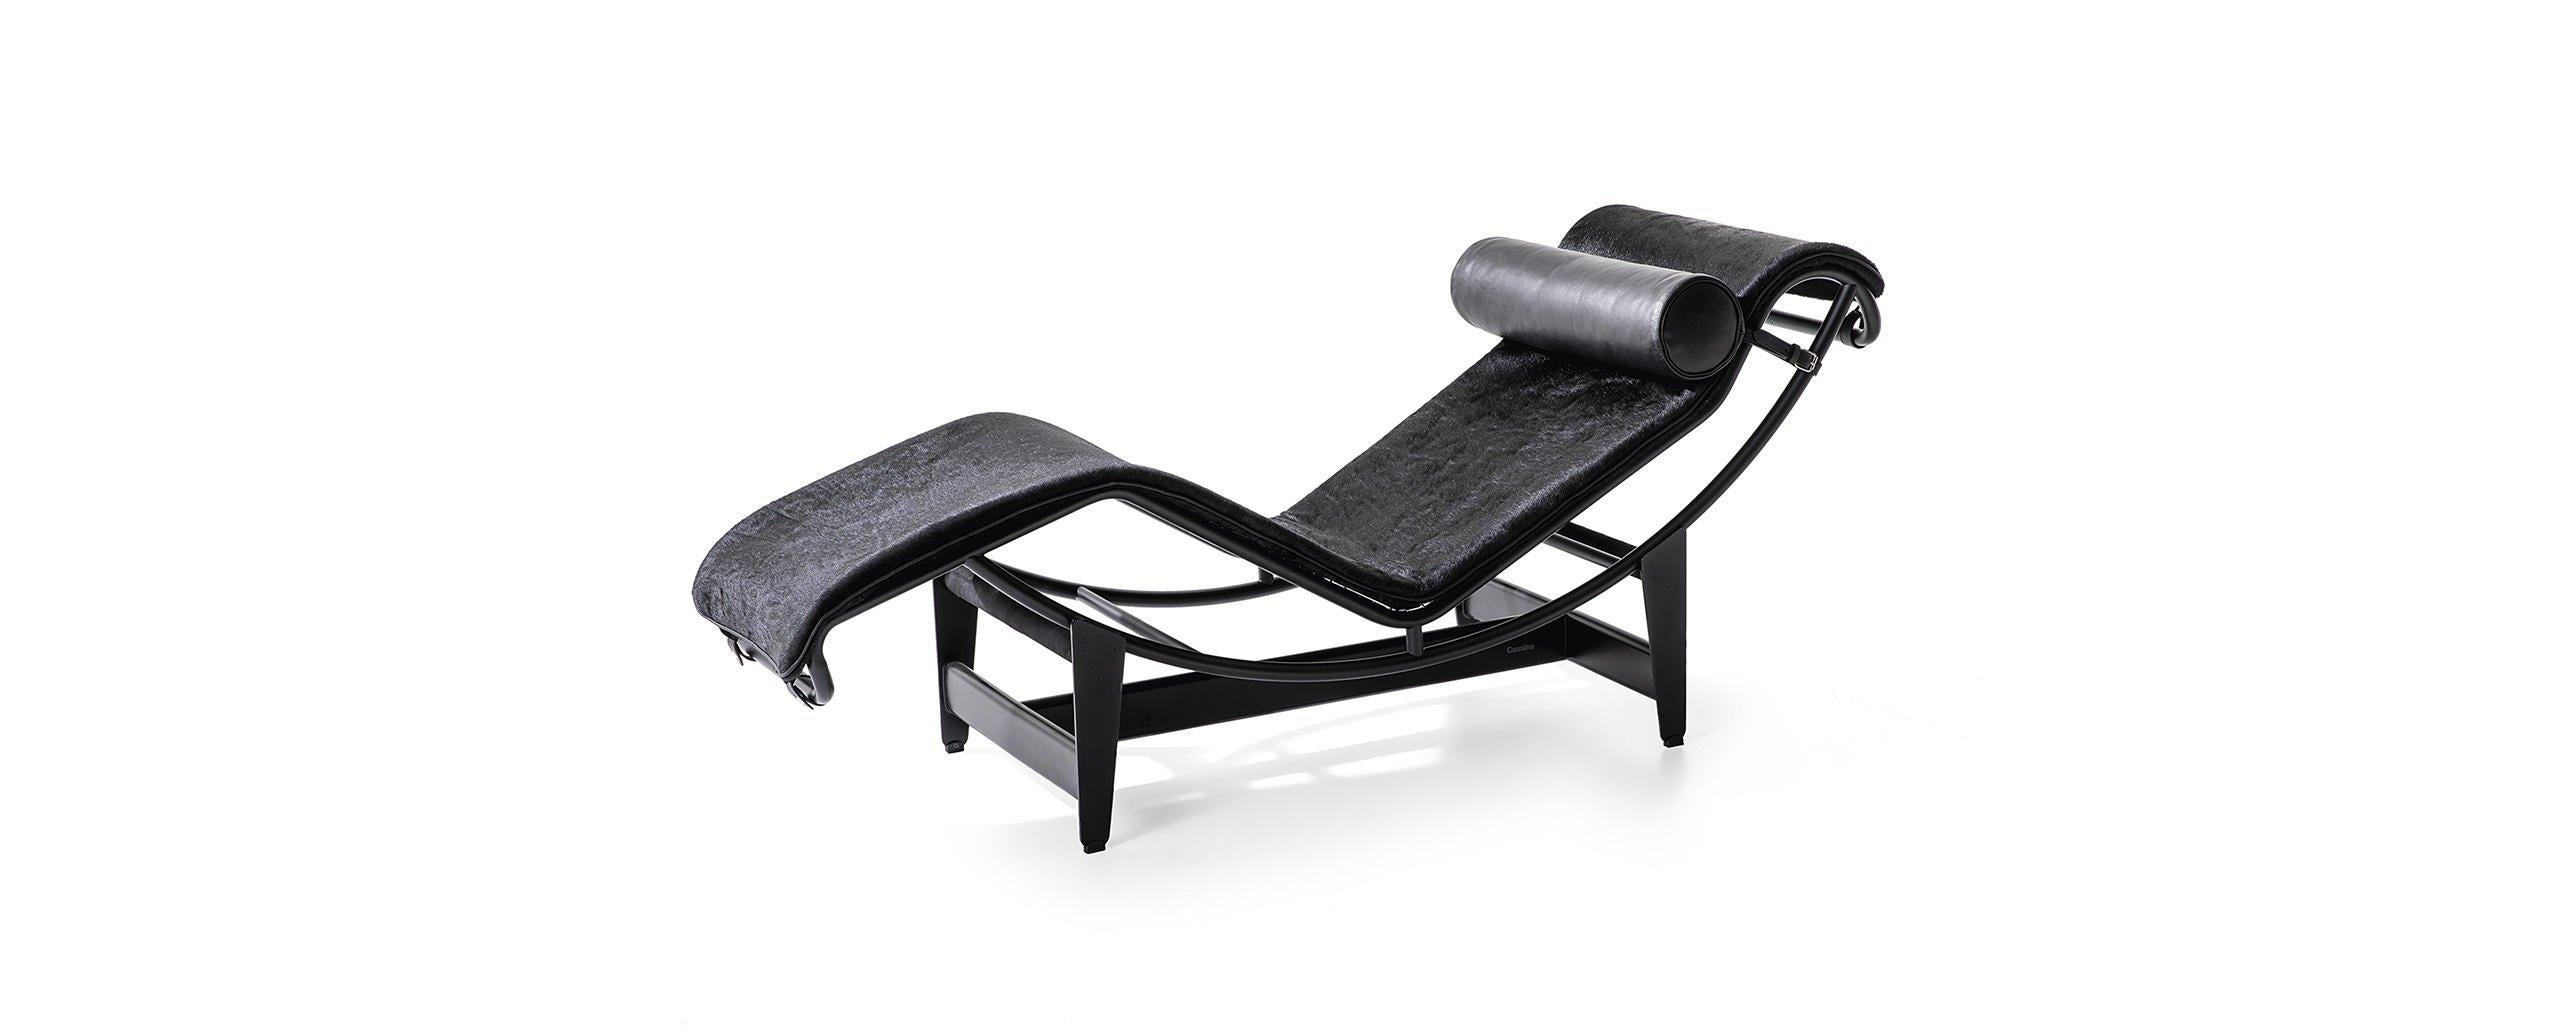 Chaise lounge designed by Le Corbusier, Pierre Jeanneret, Charlotte Perriand in 1965. Relaunched in 2019.
Manufactured by Cassina in Italy.

One of Cassina’s worldwide best-sellers, the LC4 is the quintessential chaise longue, designed in 1928, and